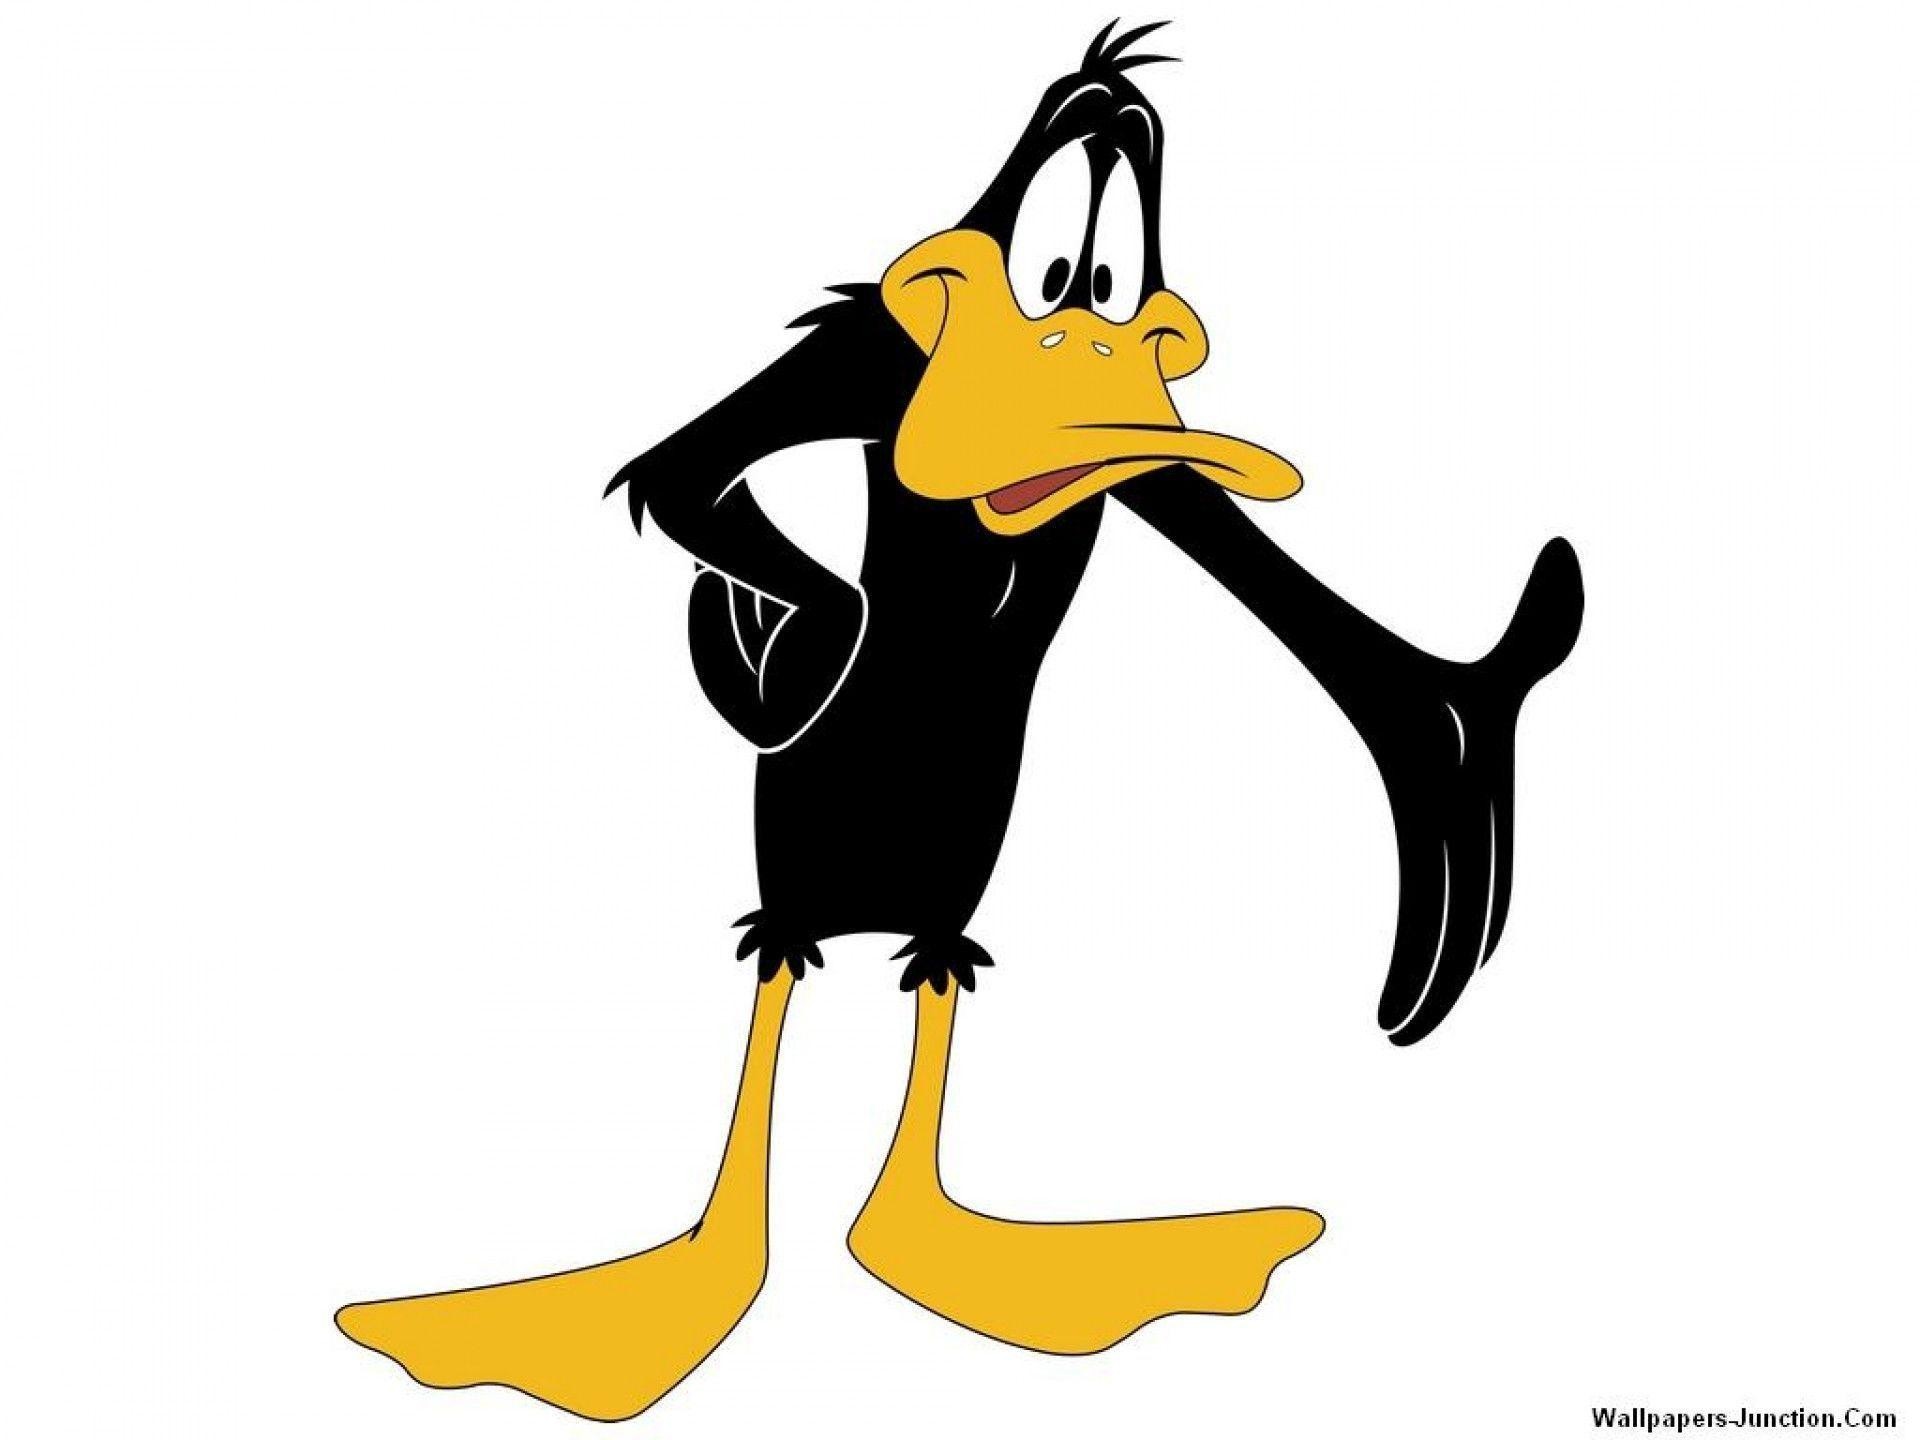 1920x1440 Daffy duck wallpapers